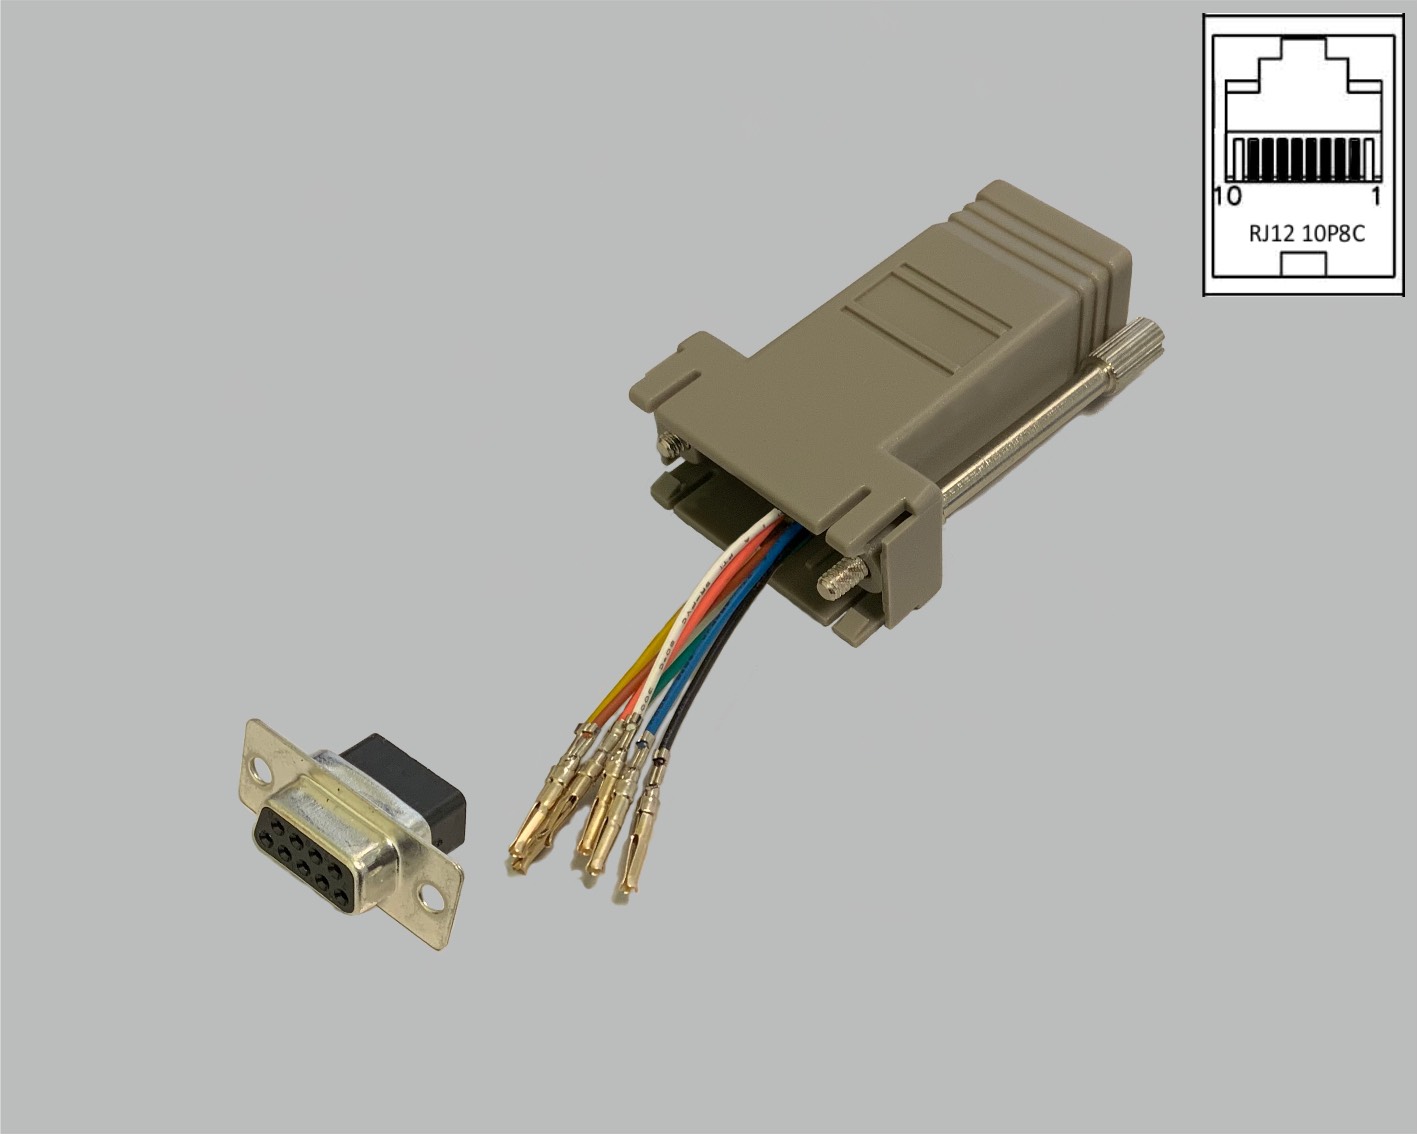 D-Sub/RJ adapter, freely configurable, D-Sub female connector 9-pole to RJ45 (10P8C) female connector, grey